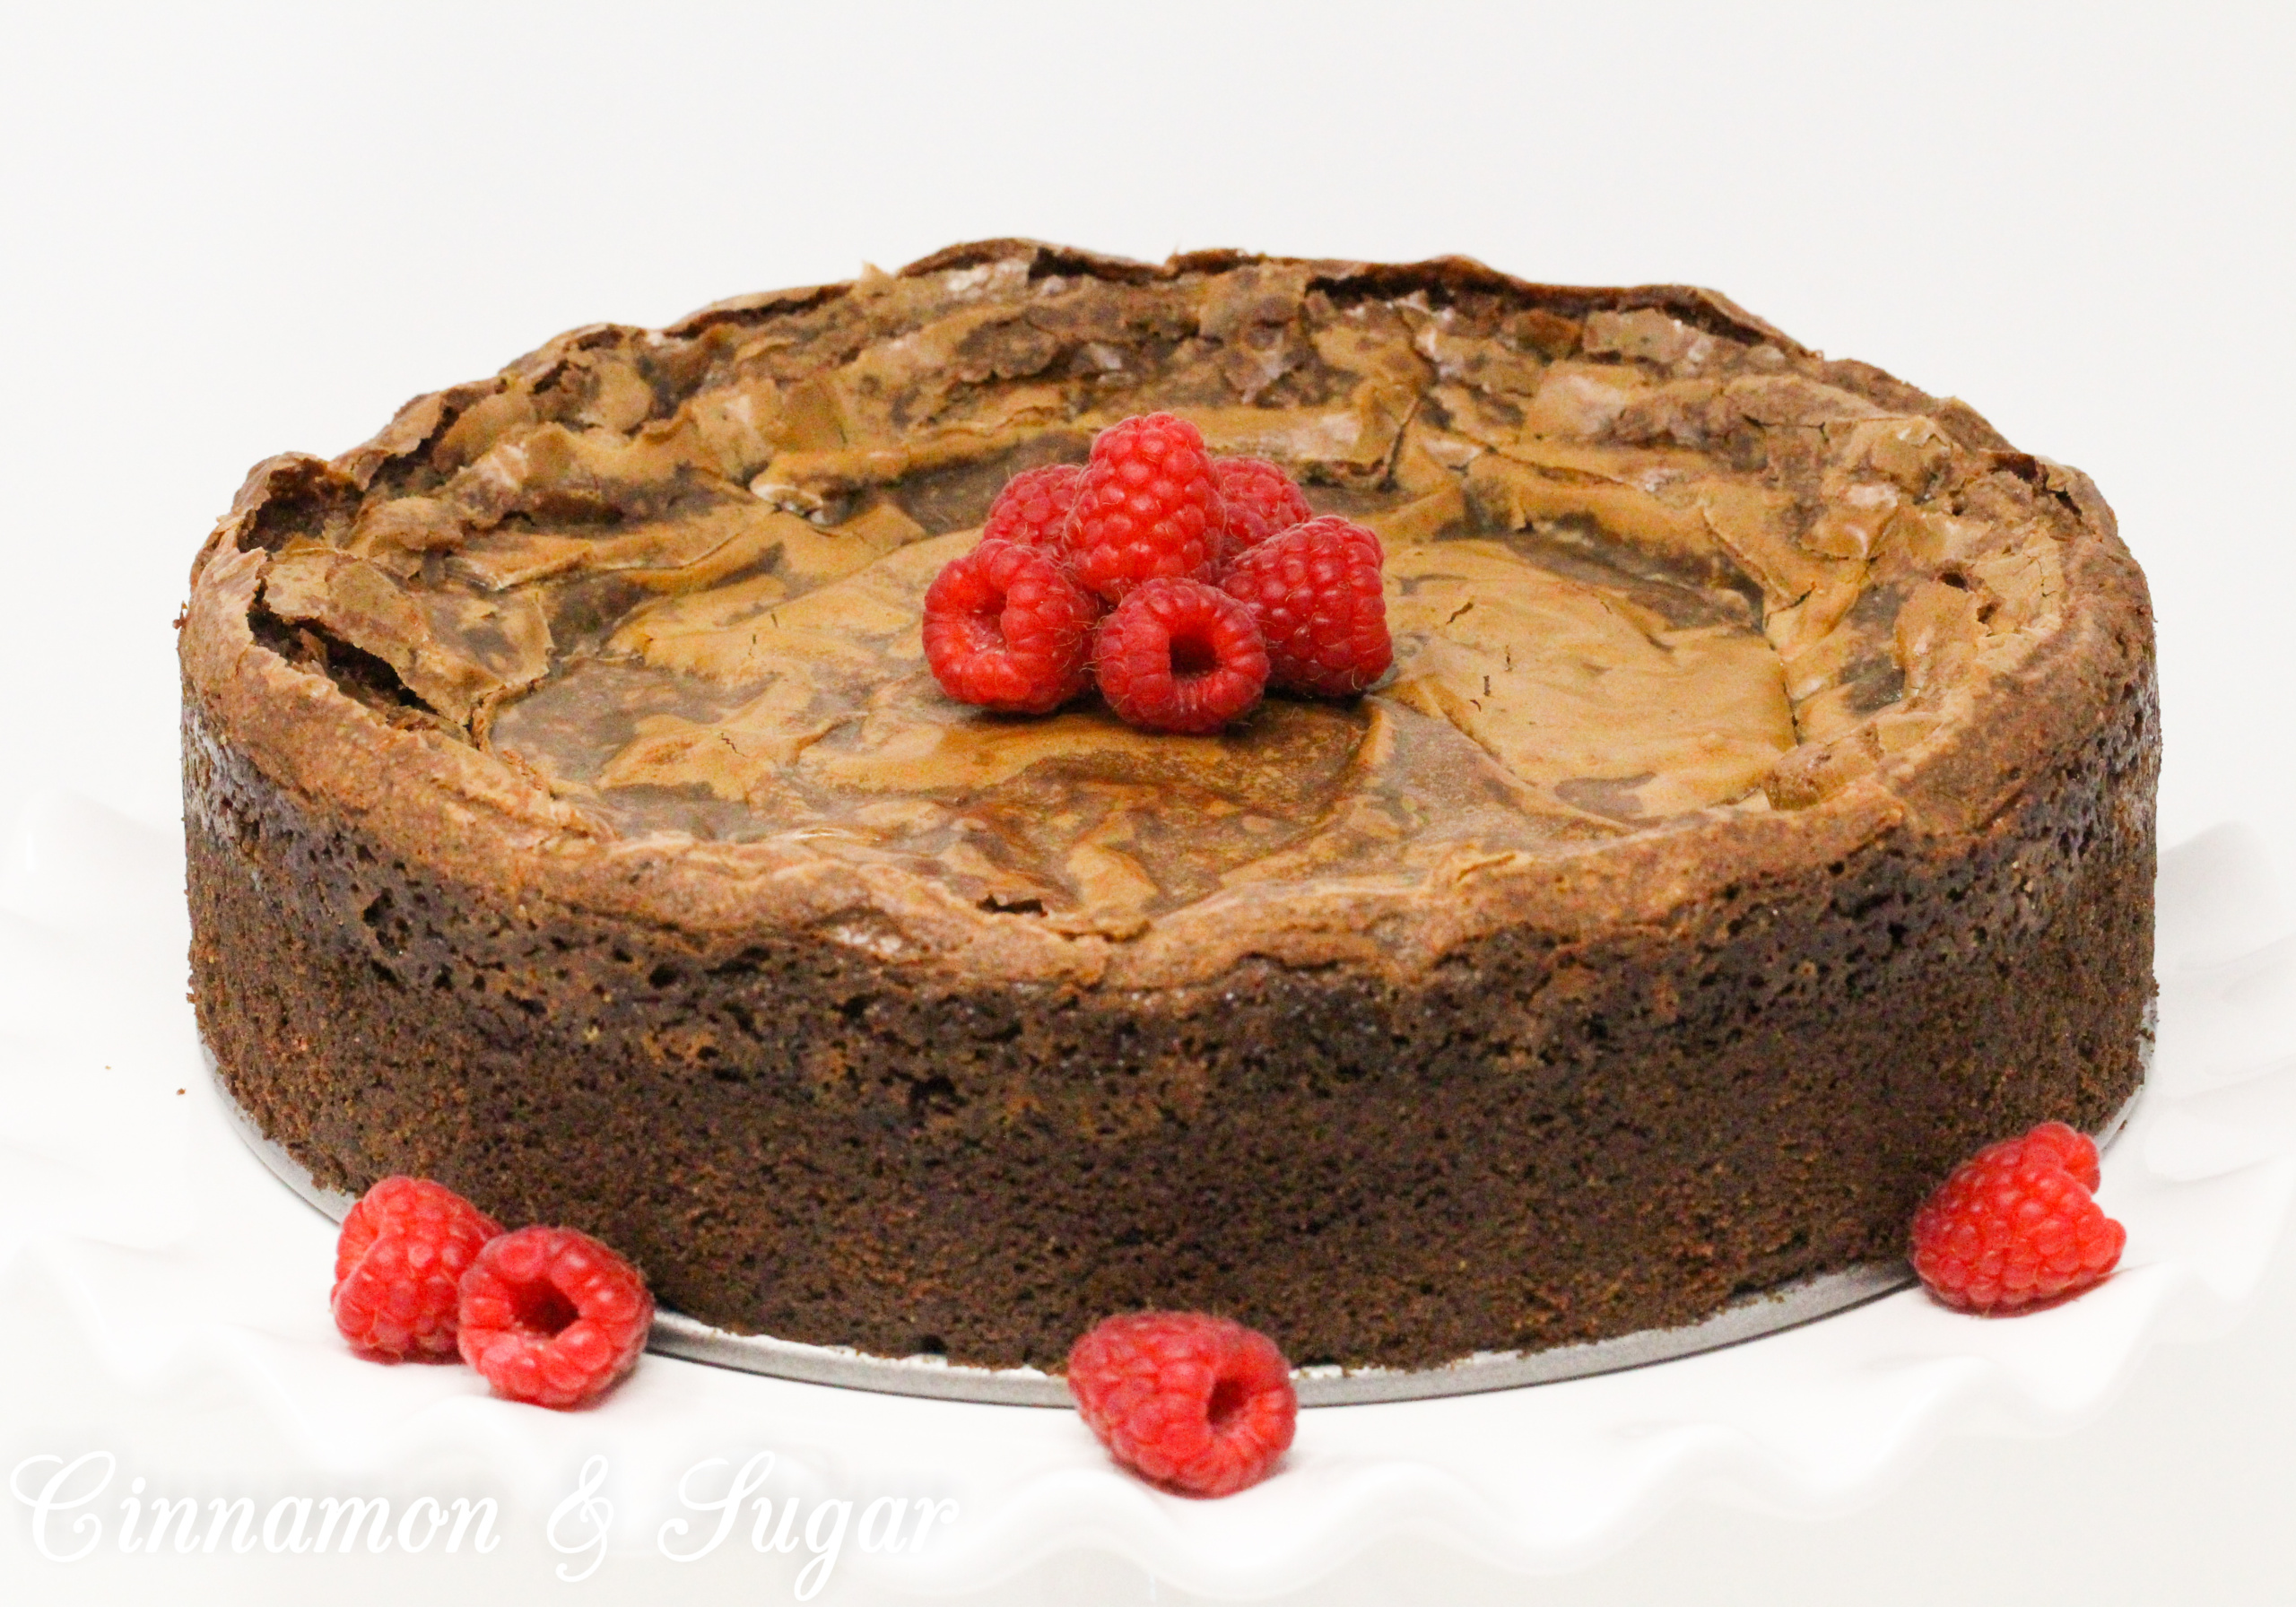 Chocolate Gooey Butter Cake is a St. Louis dessert tradition from the 1930’s. The modern version incorporates boxed cake mix to simplify matters and with the addition of dairy and pantry staples, a scrumptious dessert is created. Recipe shared with permission granted by Lynn Cahoon, author of PICTURE PERFECT FRAME.